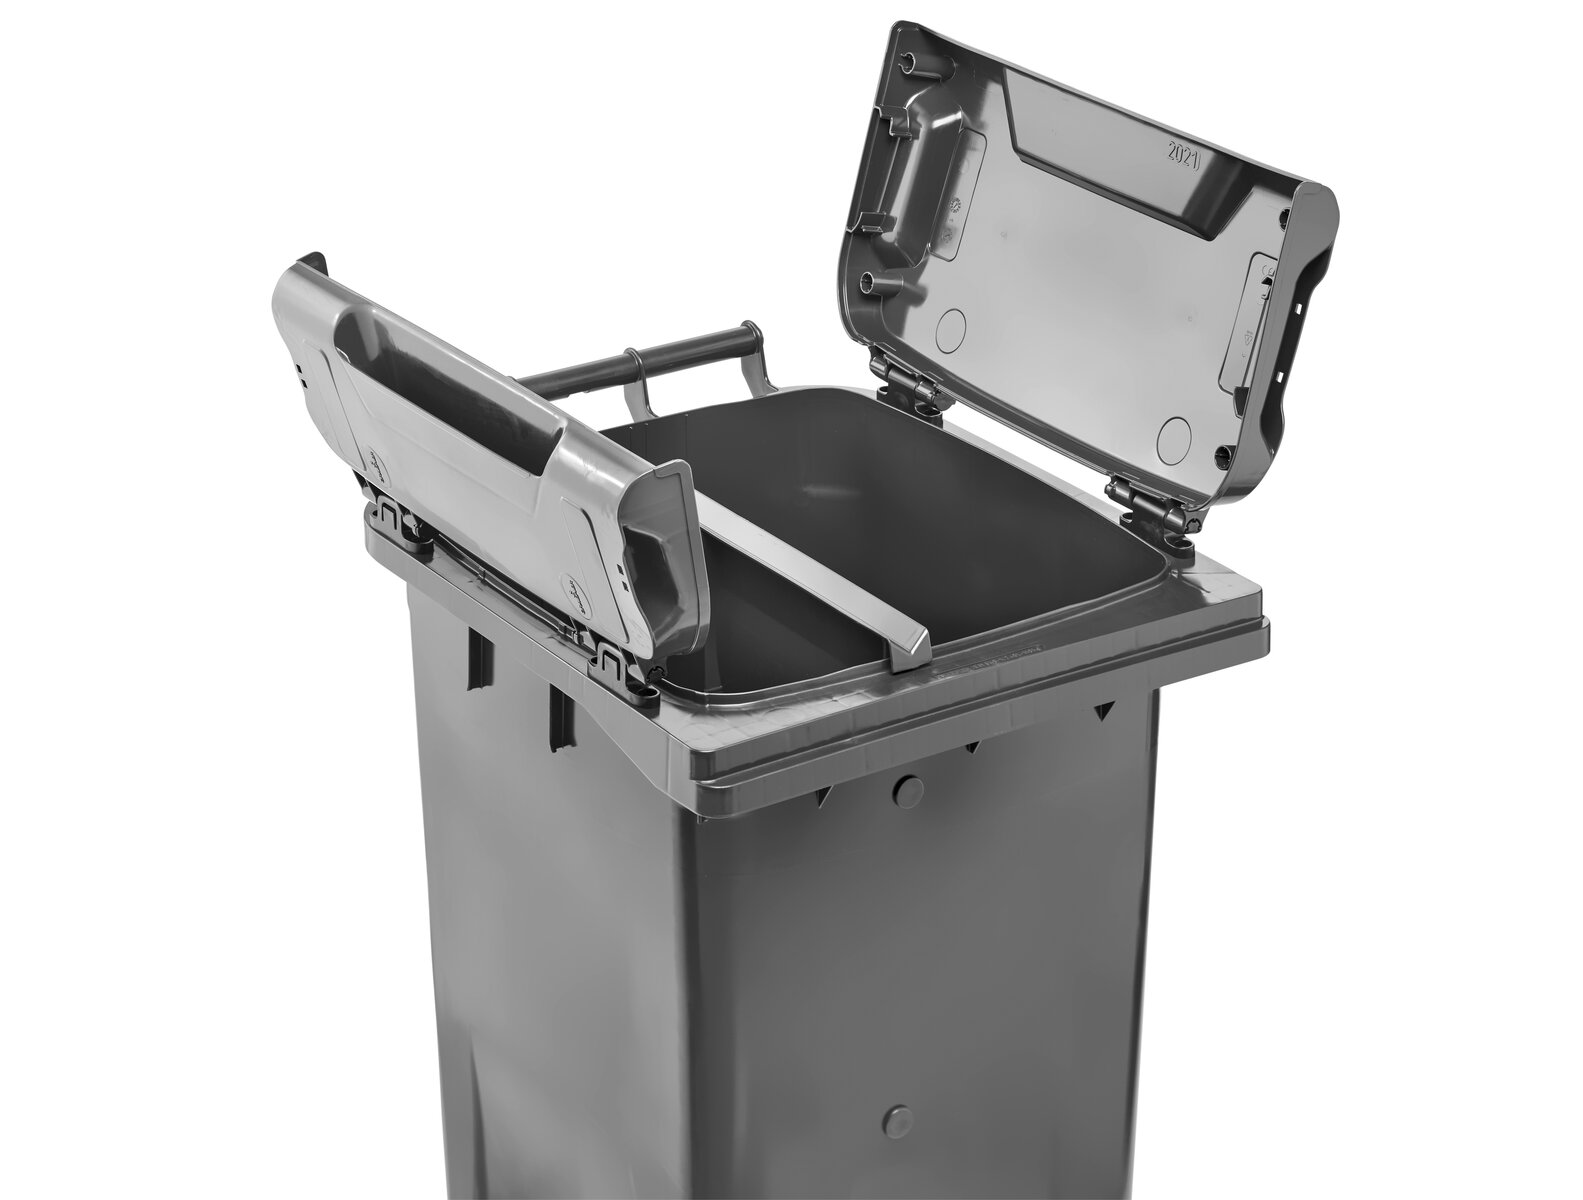 MGBneo Twin-compartment wheeled bin system